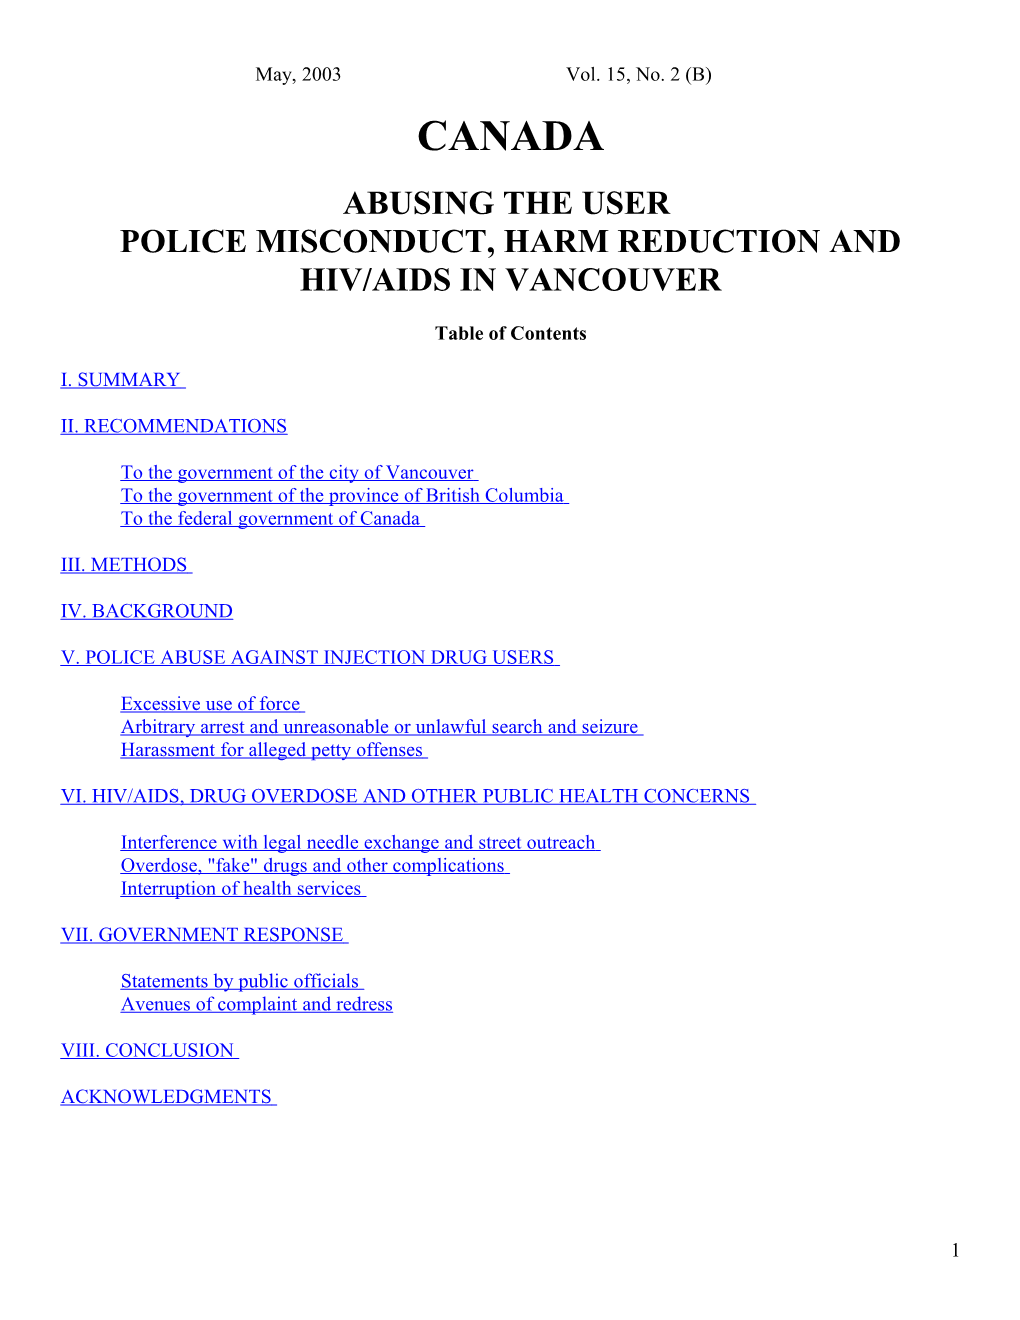 Abusing the User Police Misconduct, Harm Reduction and Hiv/Aids in Vancouver